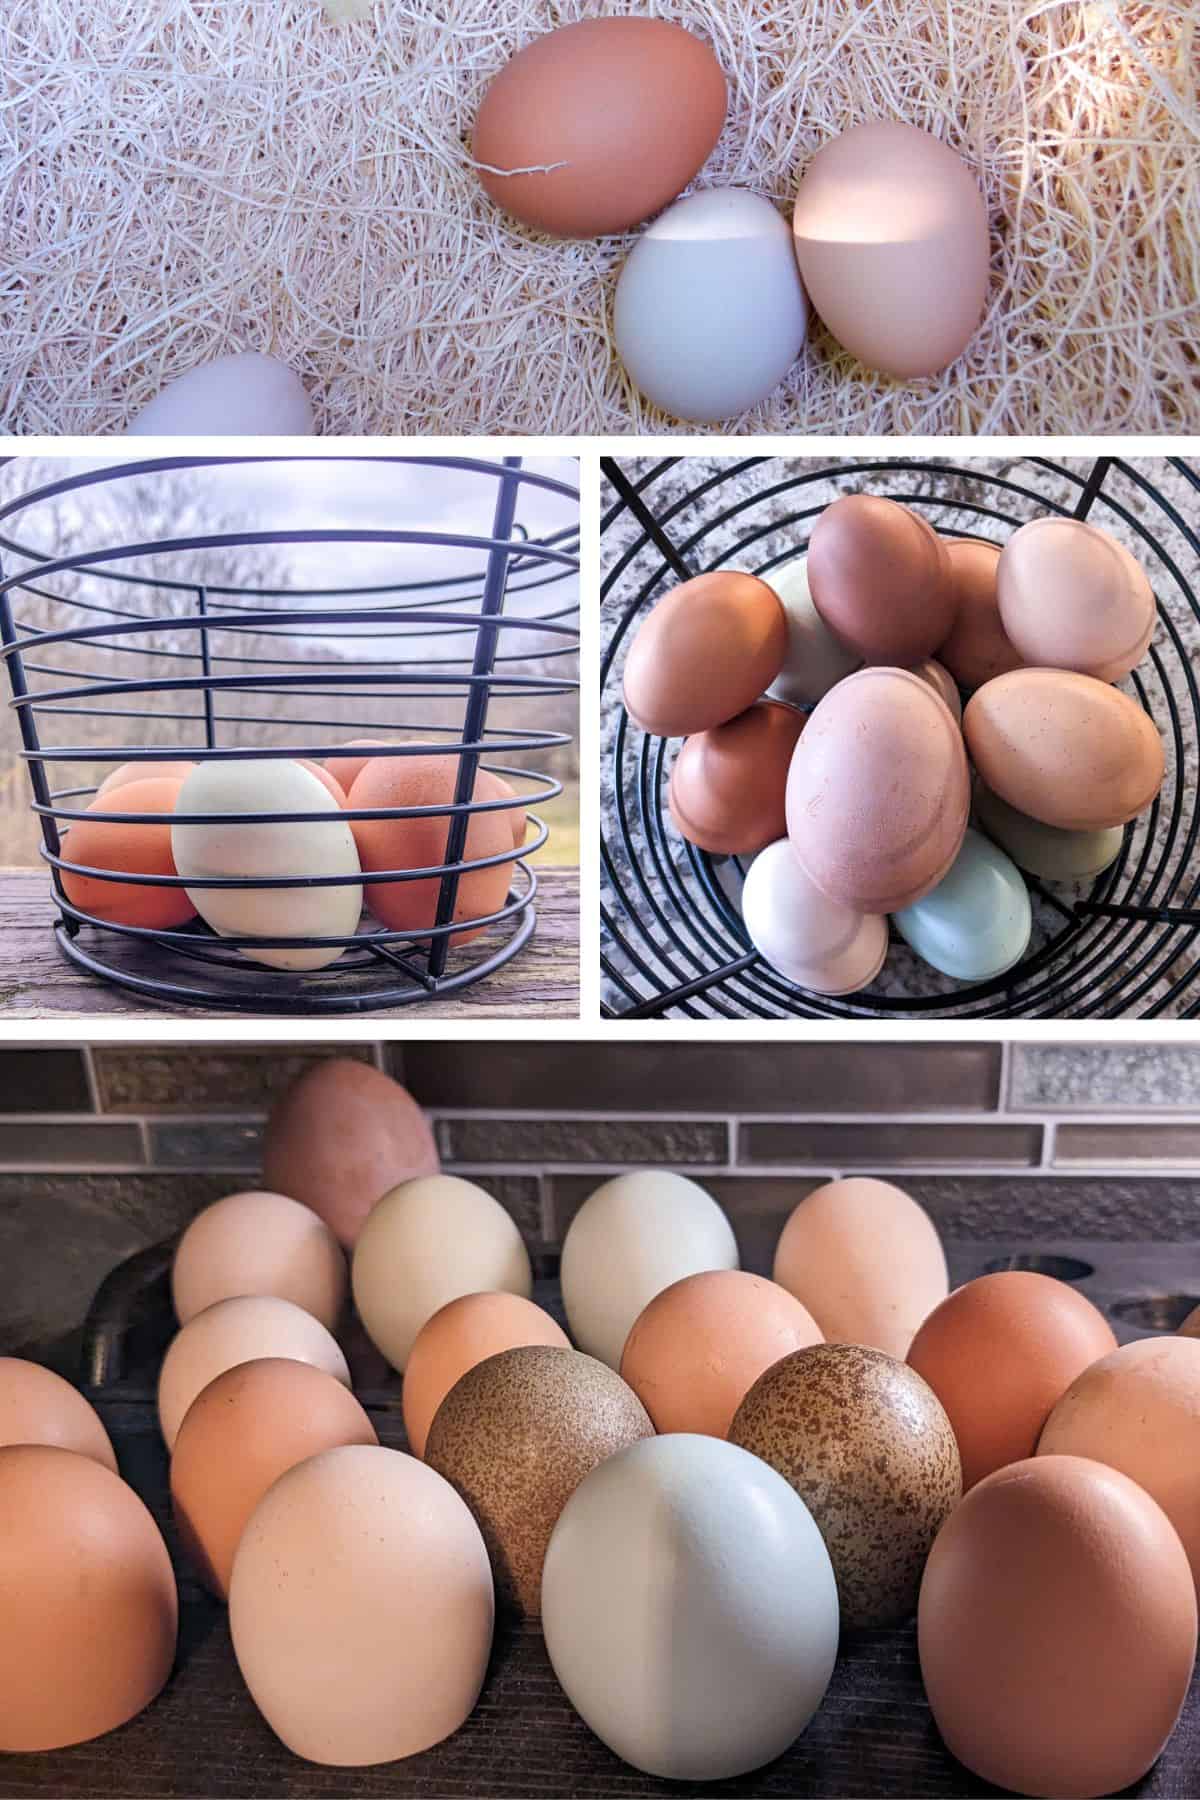 4 image collage showing backyard chicken eggs in nesting box, basket from the side, top view filled basket and stored on our kitchen counter